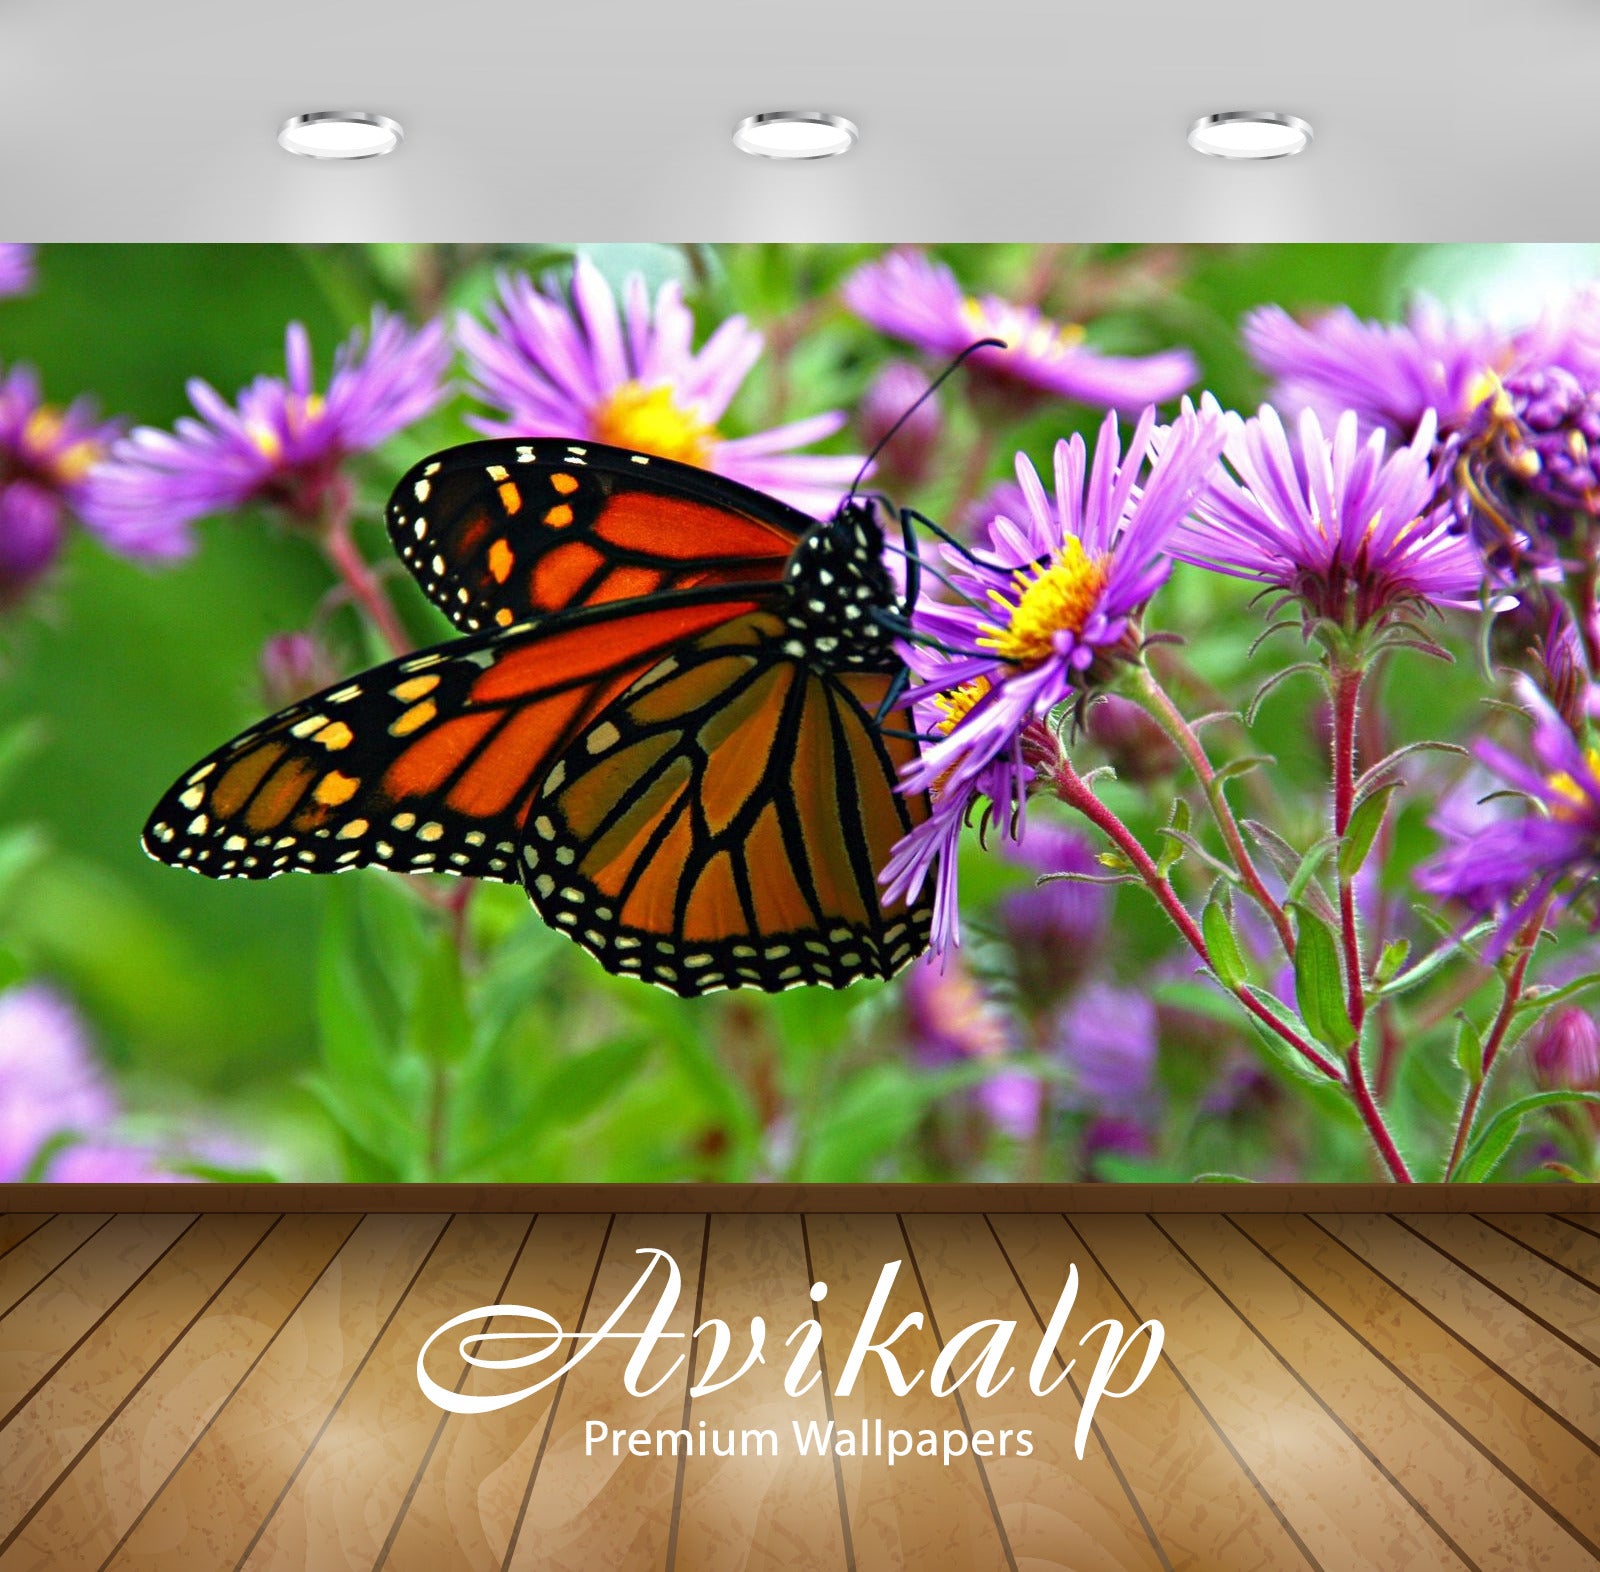 Avikalp Exclusive Awi2735 Insect Monarch Butterfly On Purple Flowers Full HD Wallpapers for Living r